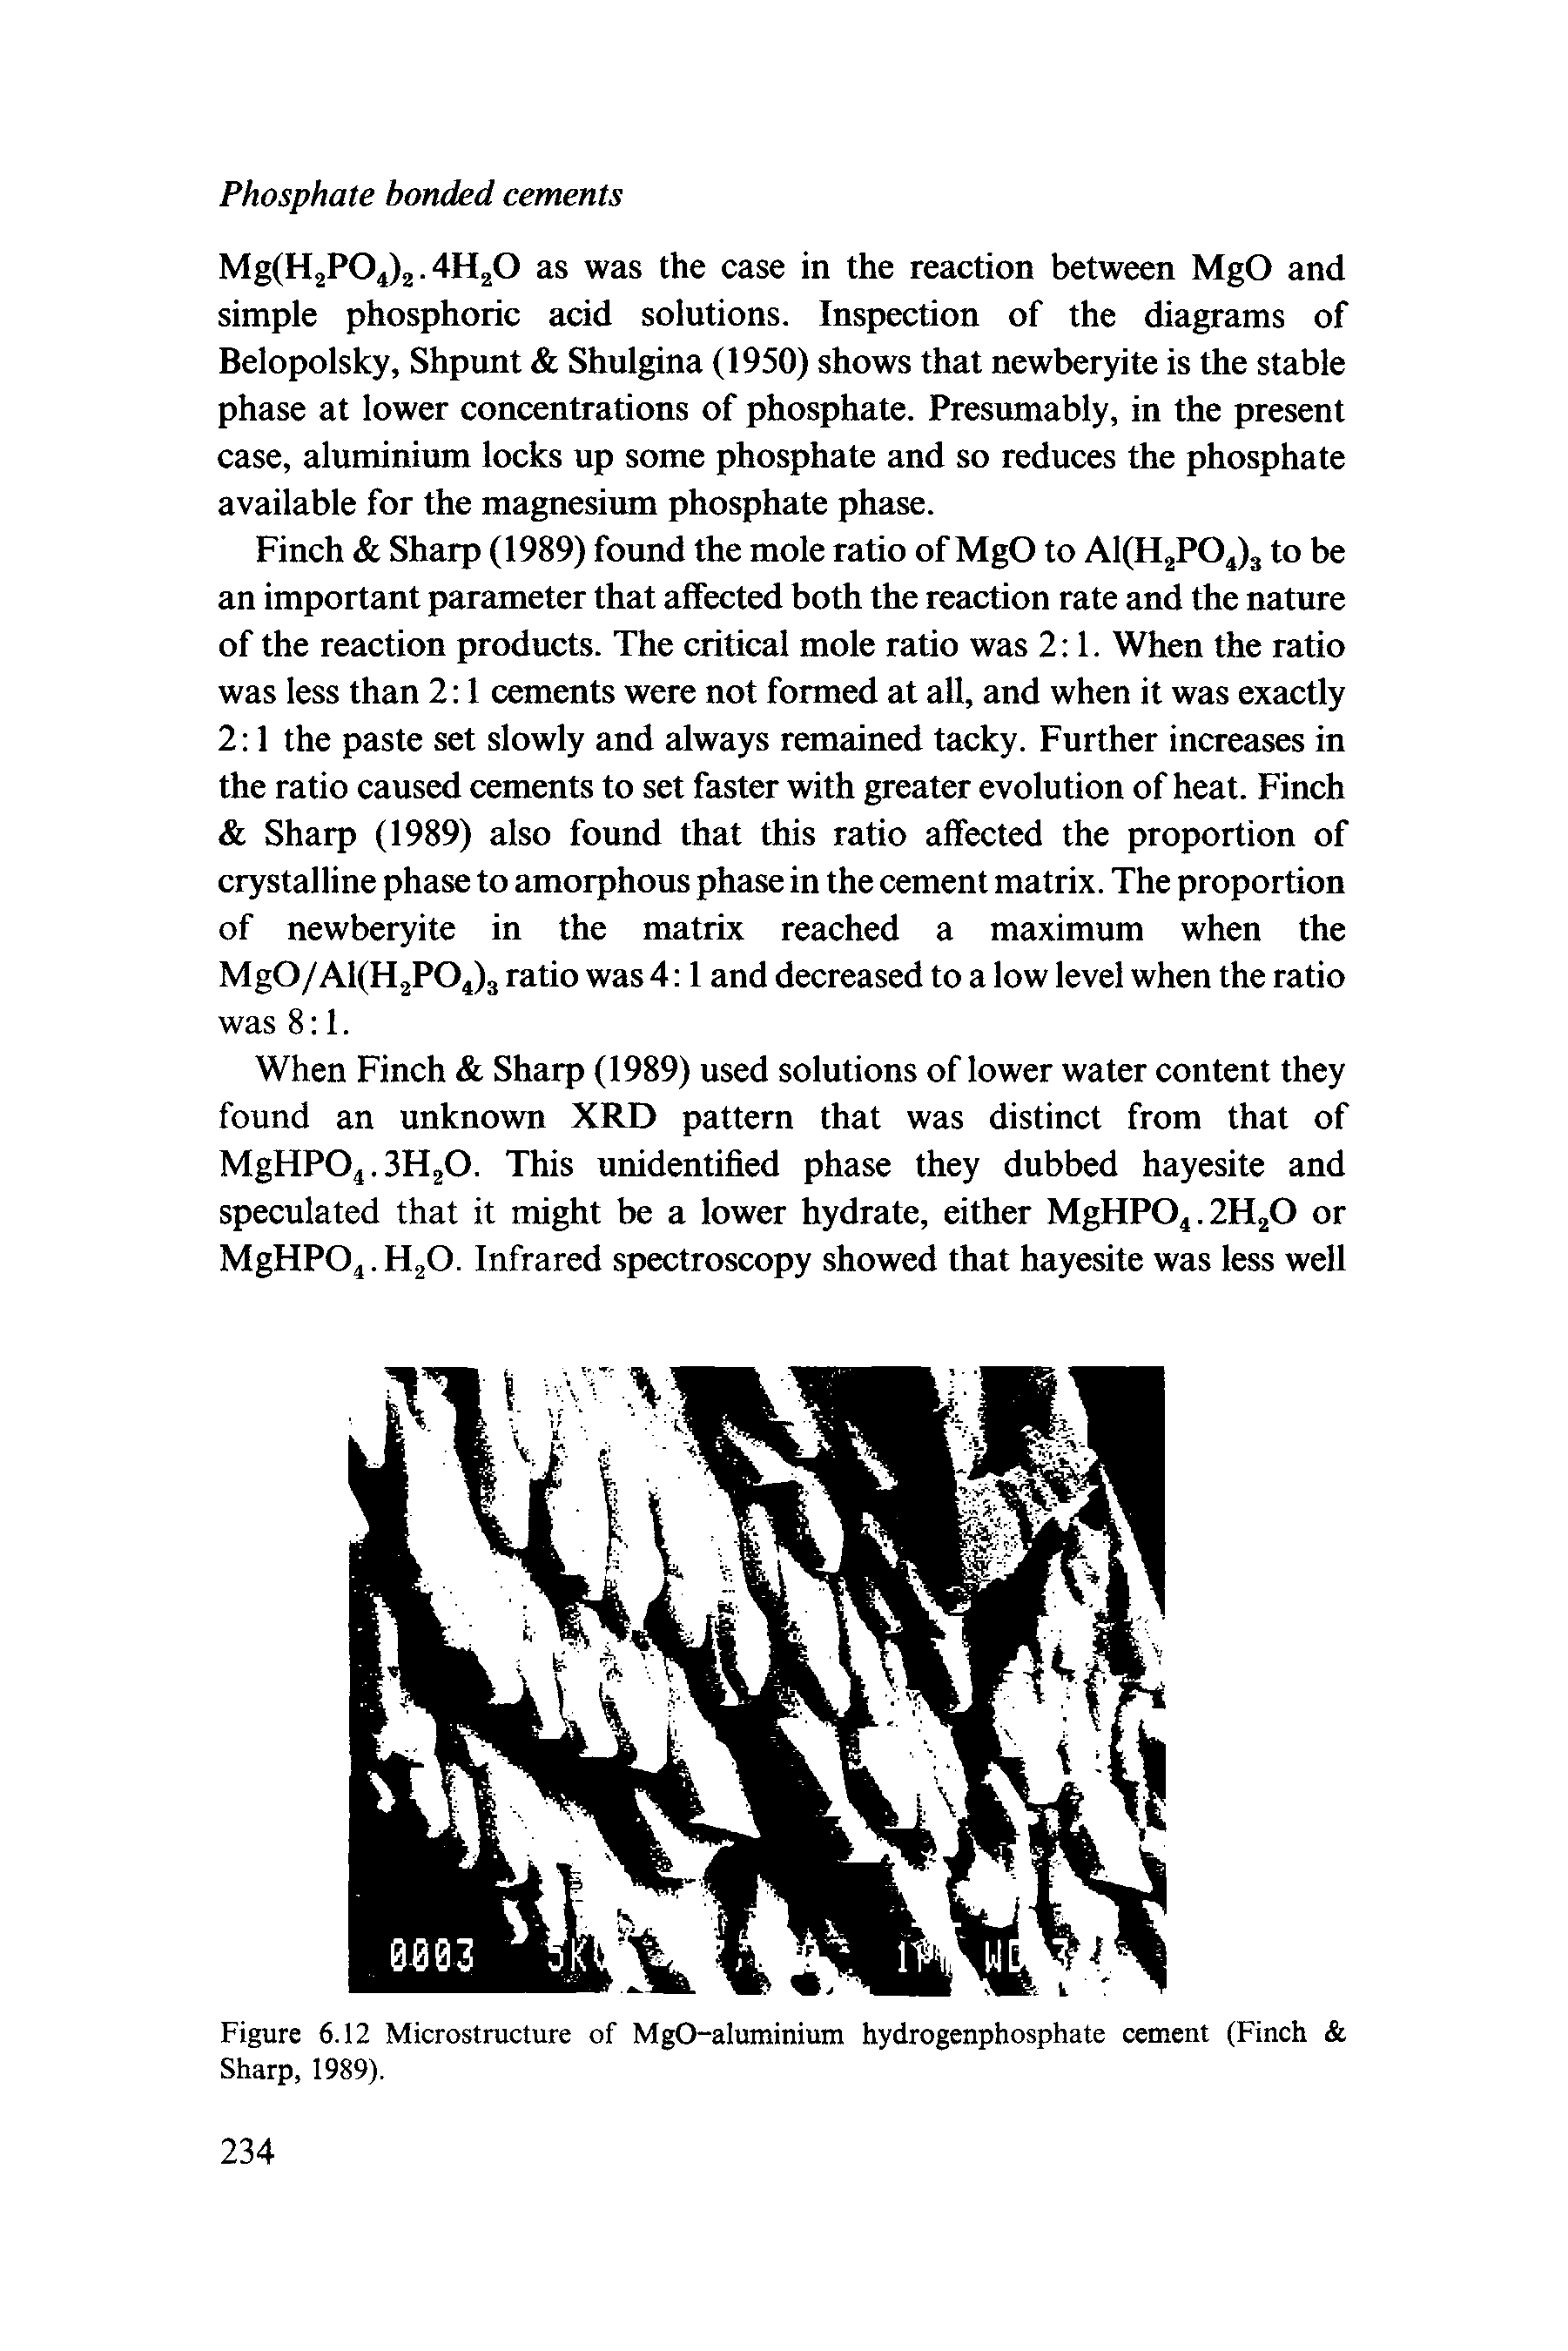 Figure 6.12 Microstructure of MgO-aluminium hydrogenphosphate cement (Finch Sharp, 1989).